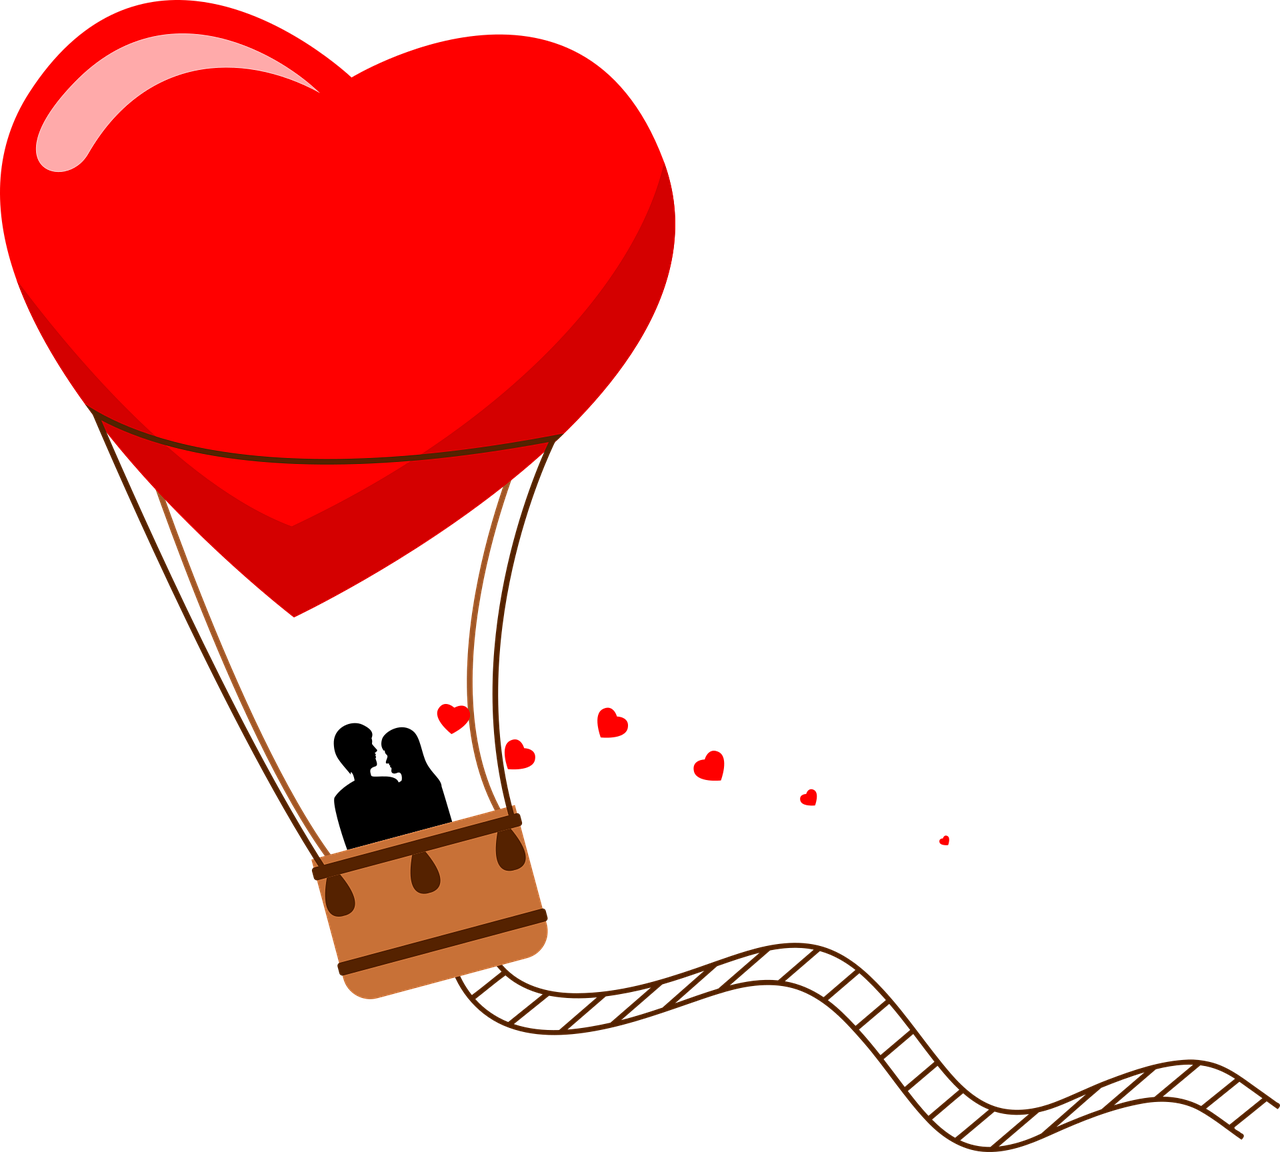 A hot air balloon, in the shape of a red heart